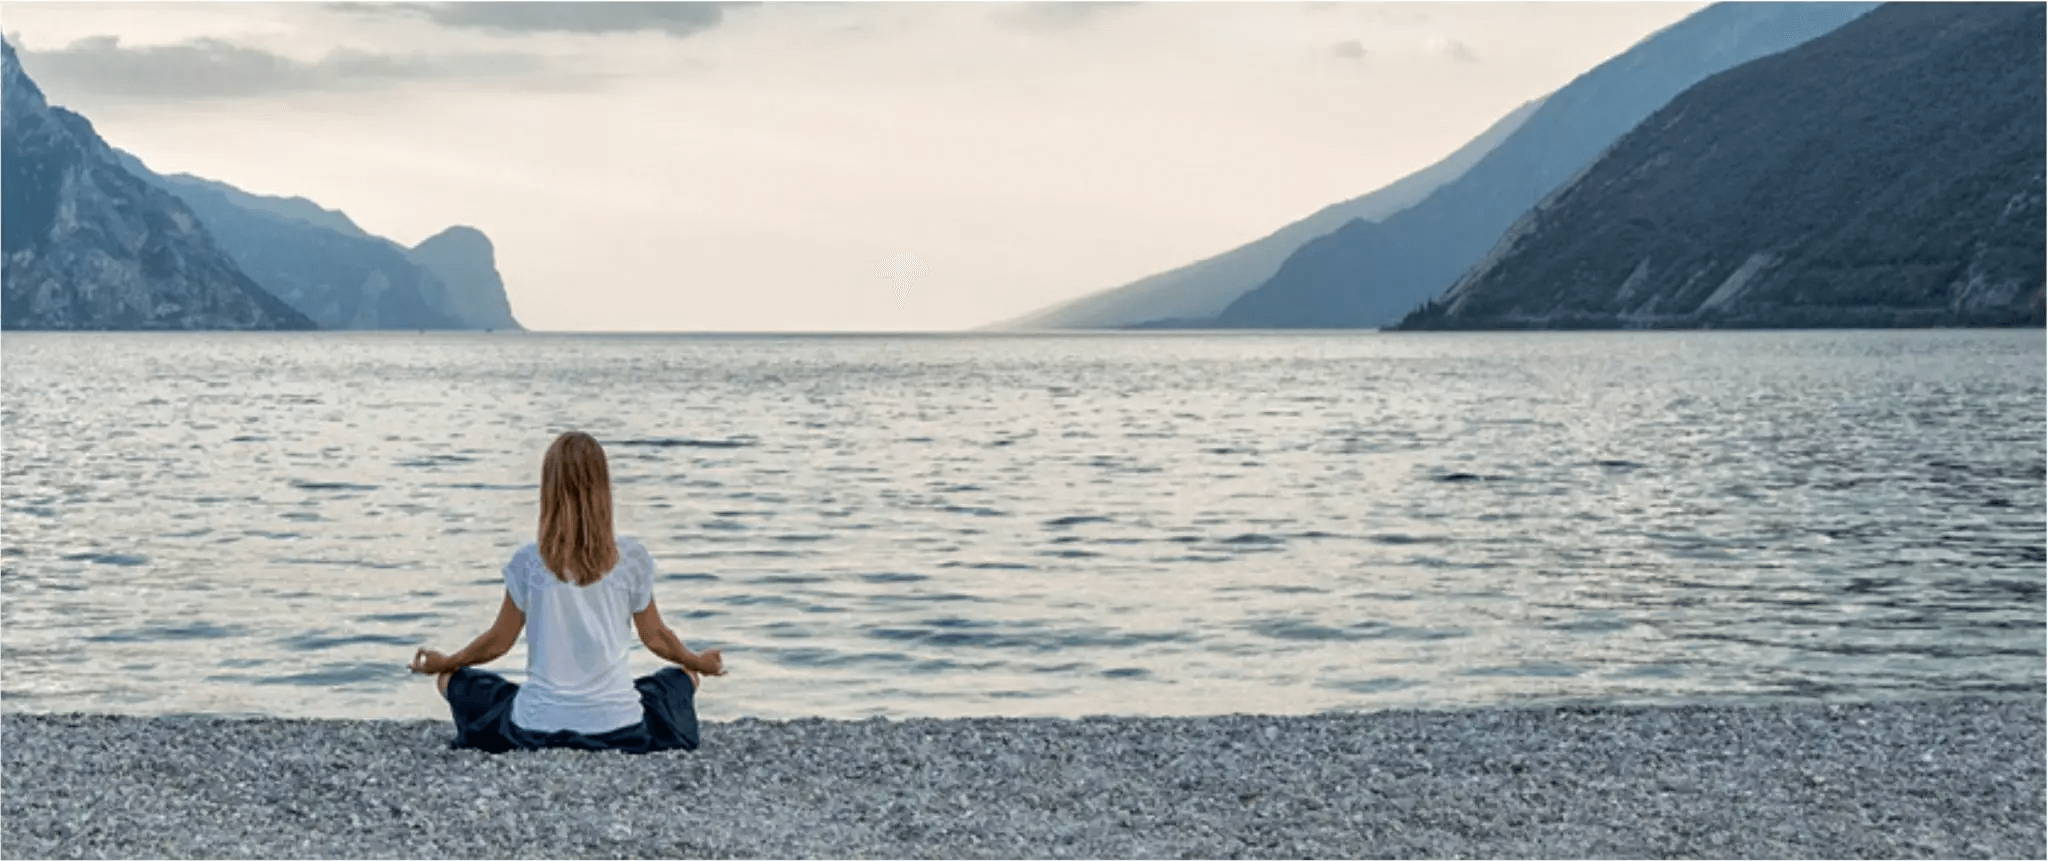 blonde haired woman, in a white shirt meditating on the edge of the water